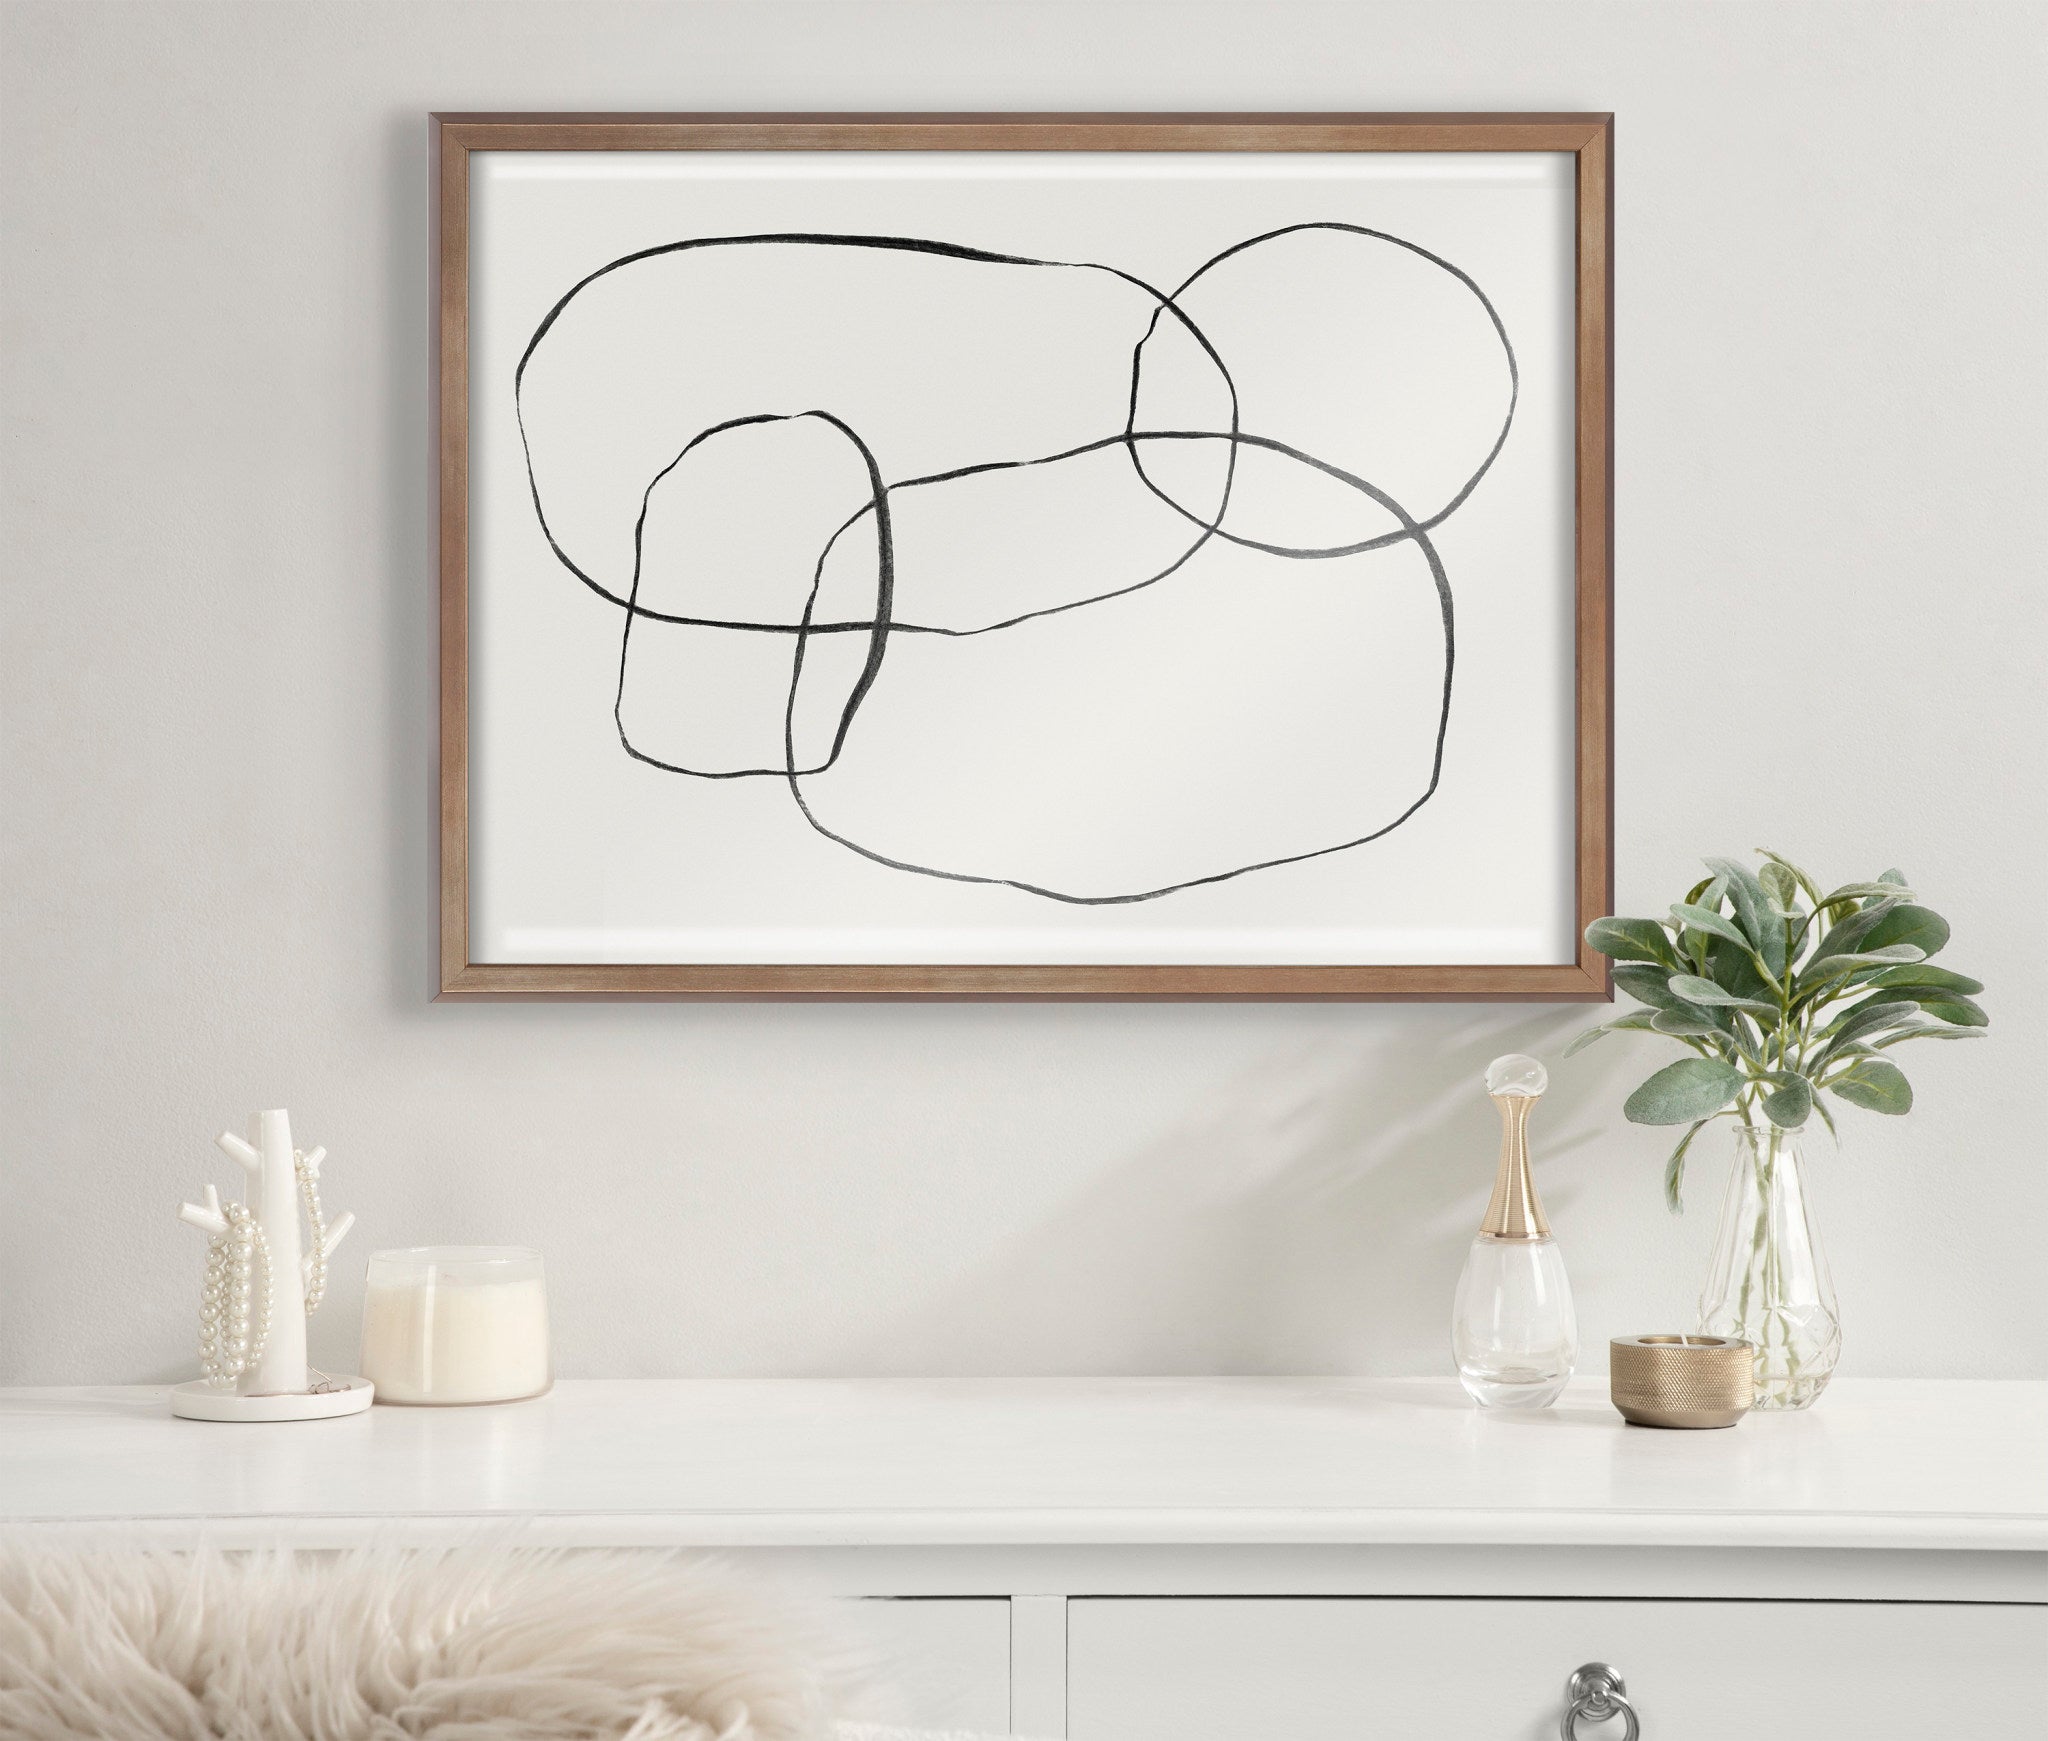 Blake 871 Modern Circles Framed Printed Glass by Teju Reval of SnazzyHues